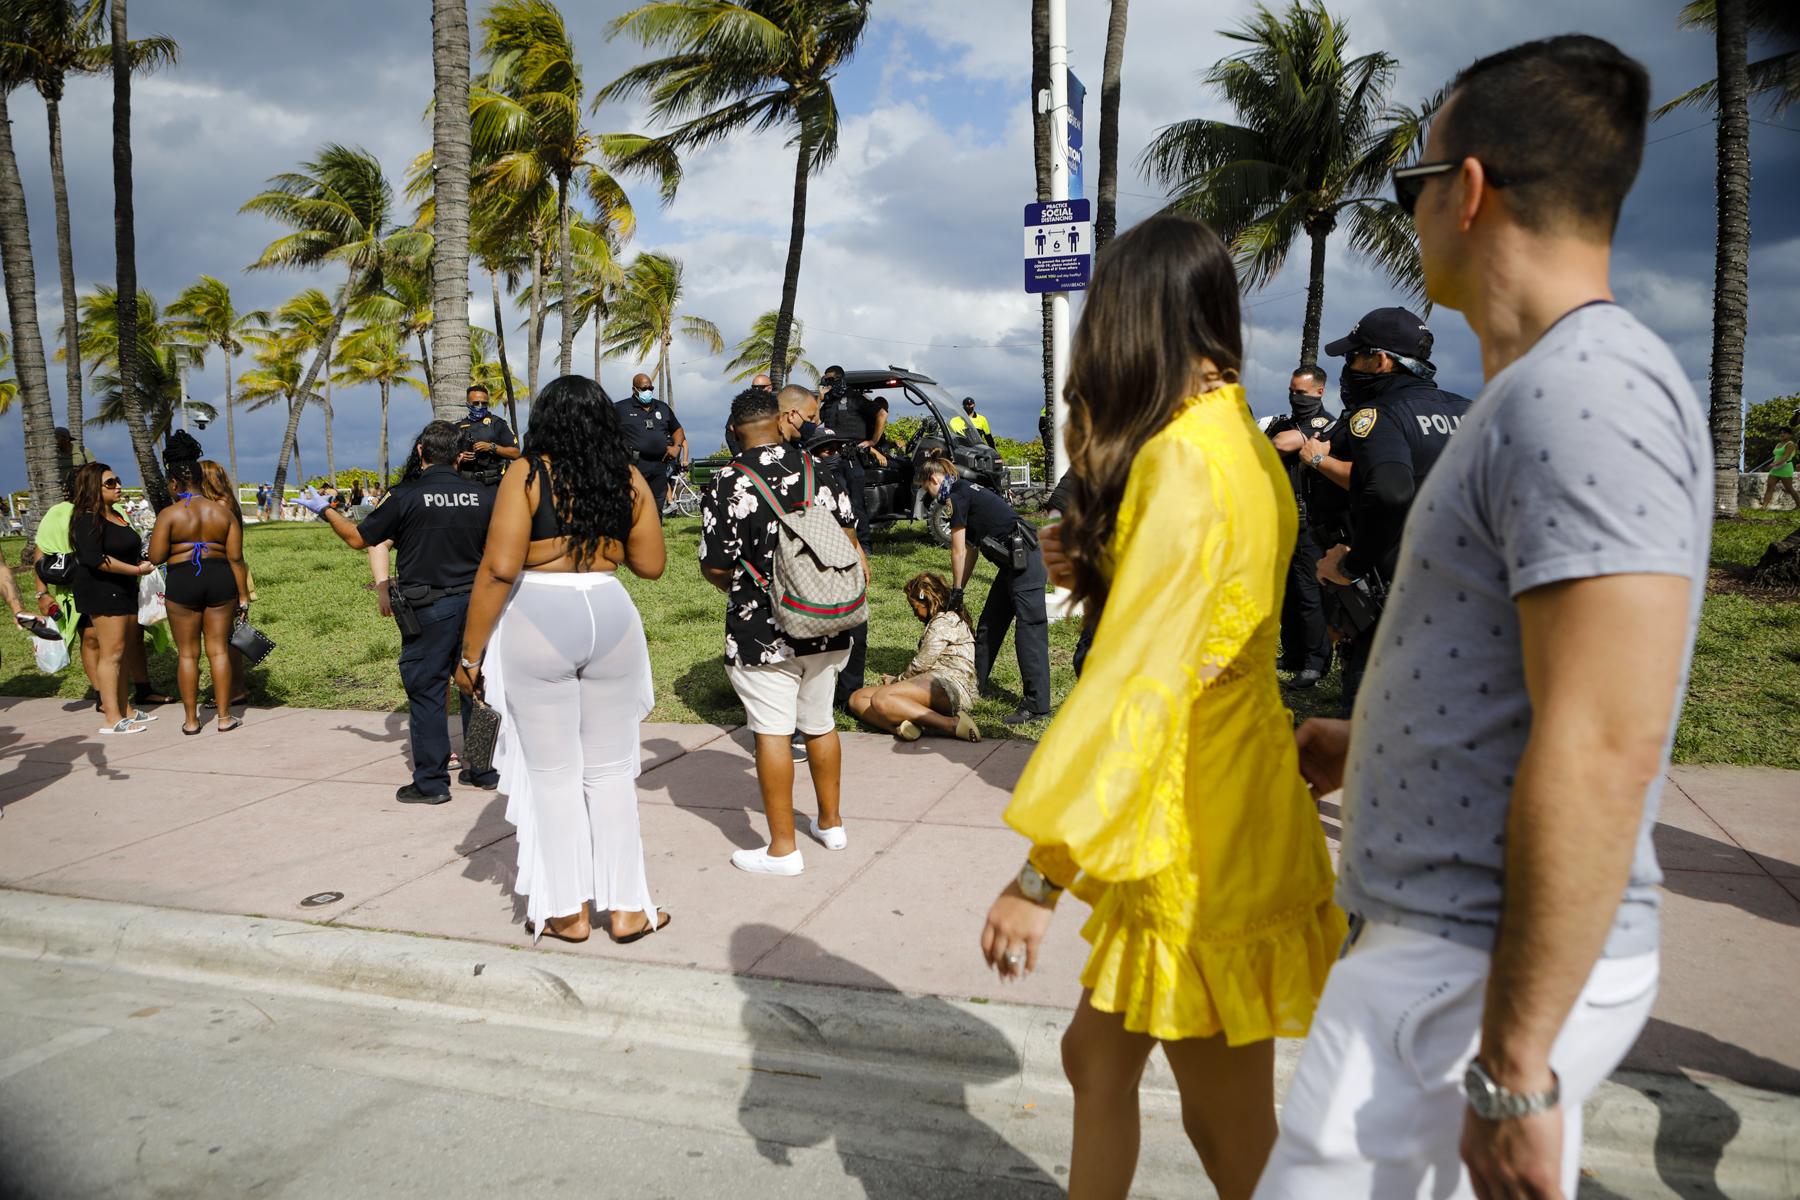 2021 Spring Break @ Miami Beach - Police officers help a woman during Spring Break in Miami...